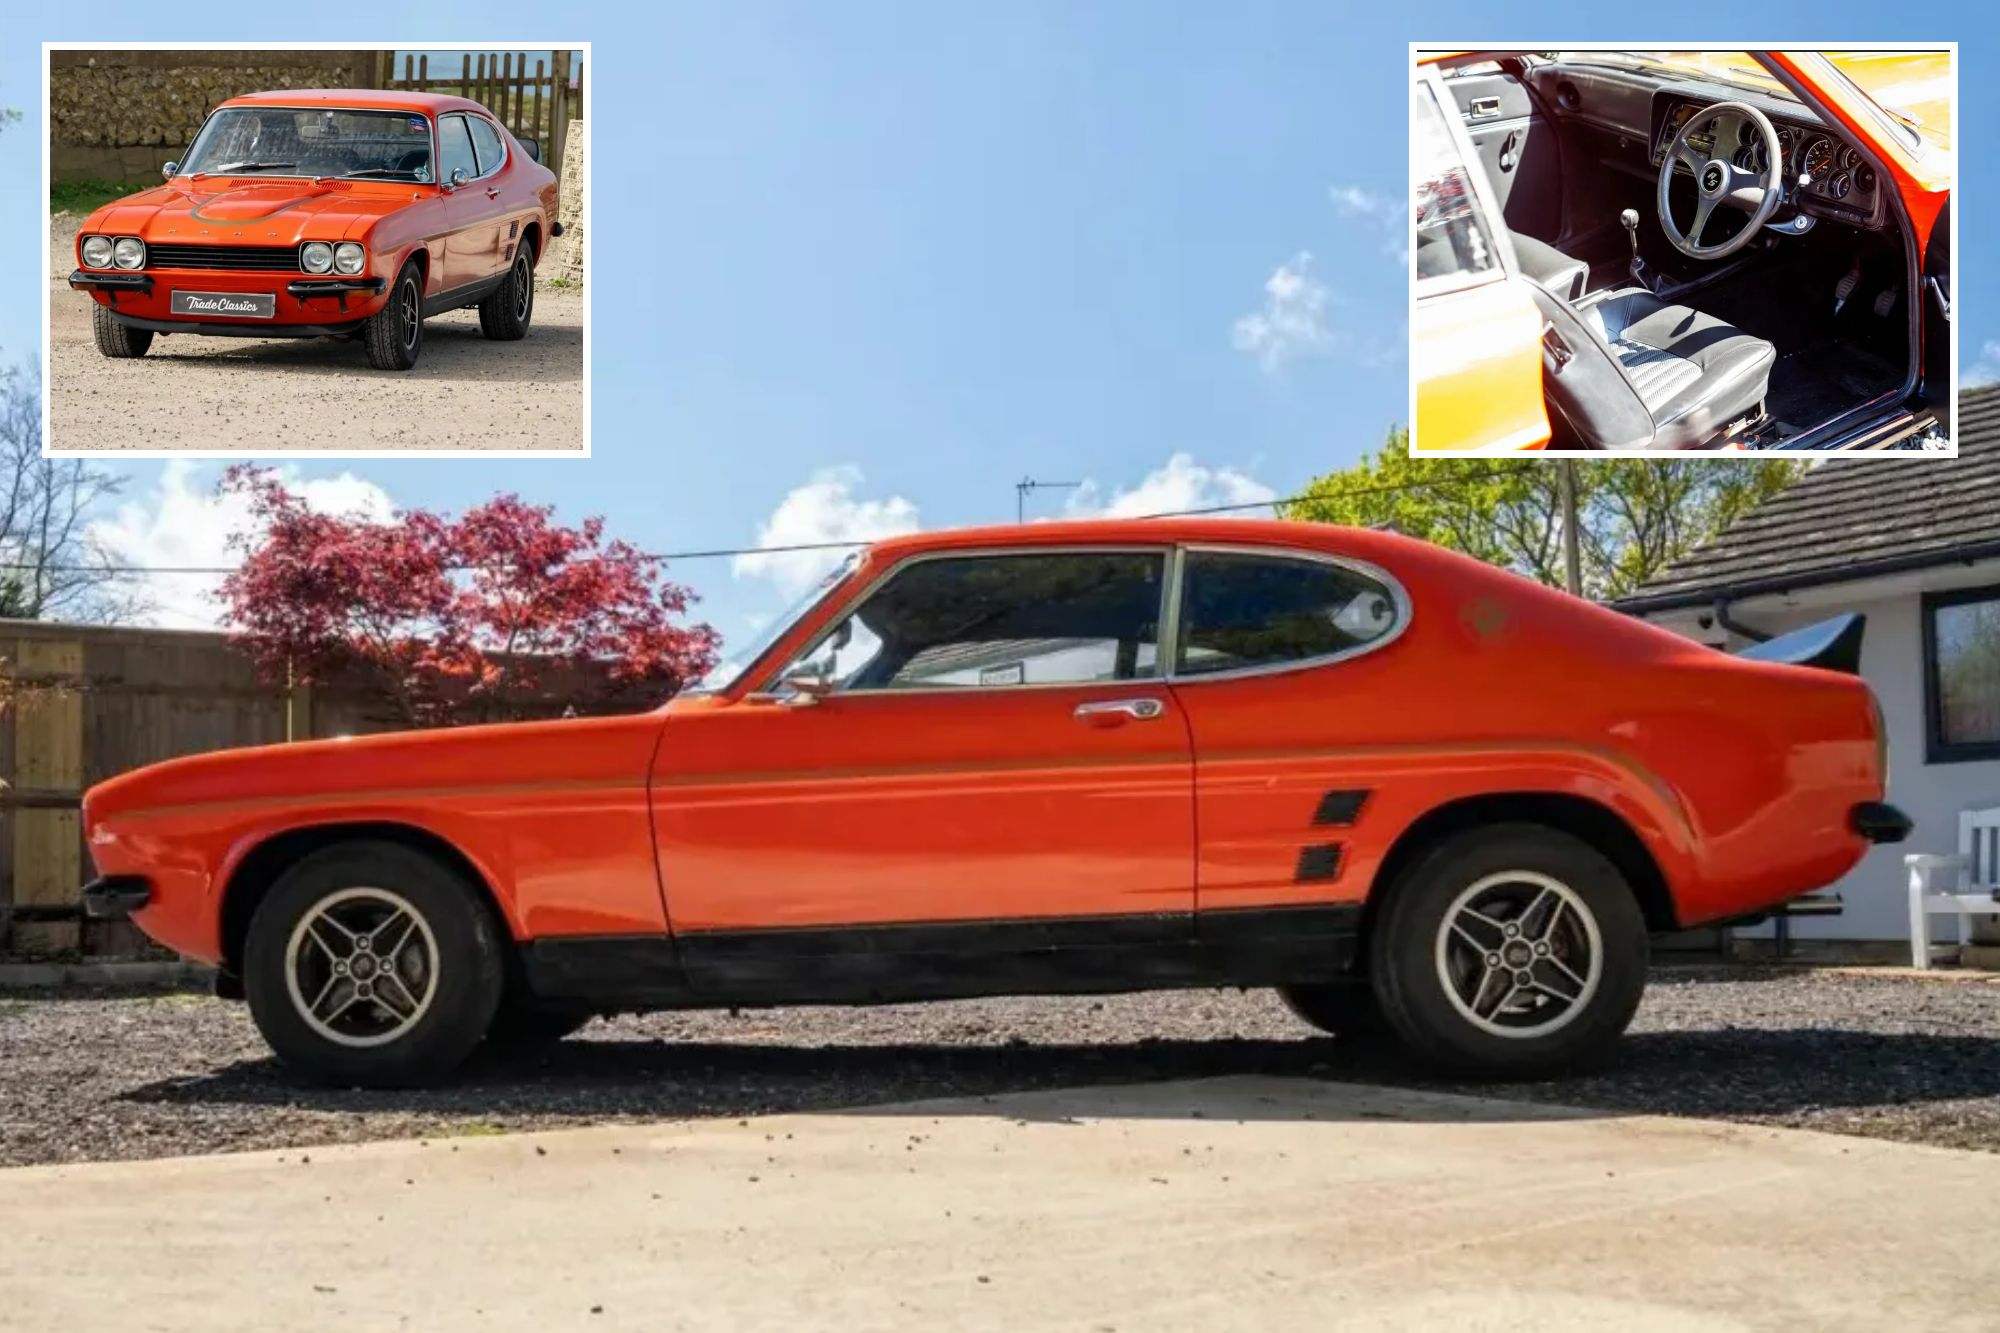 Ford Capri left in a garage for 25 years up for sale at huge price